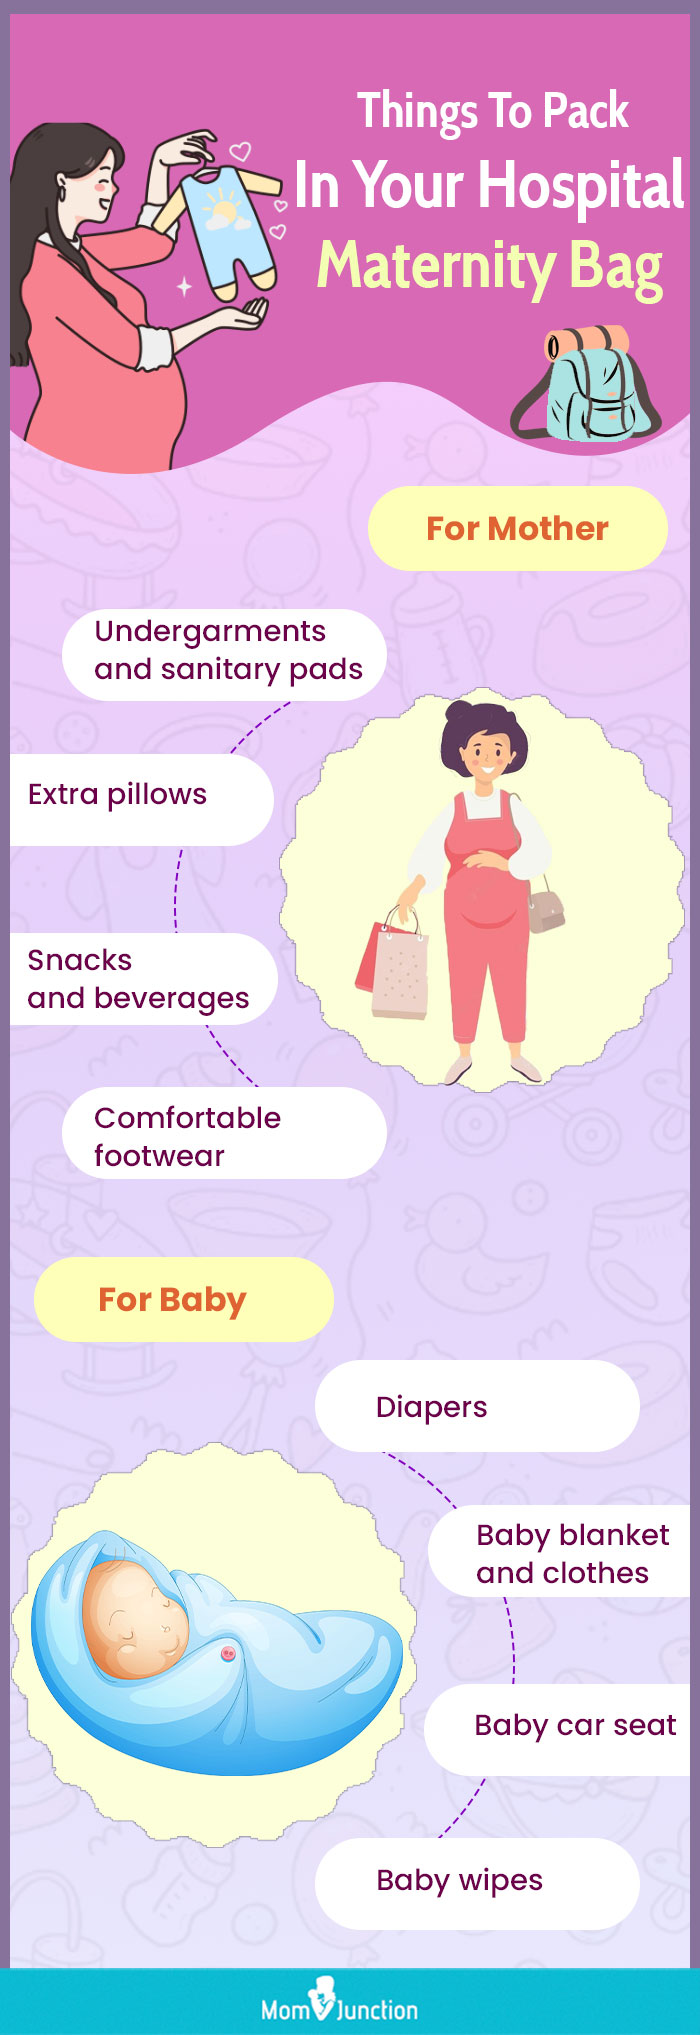 Maternity Hospital Bag Checklist: What To Pack For Mom & Baby For Birth -  The Mom Edit